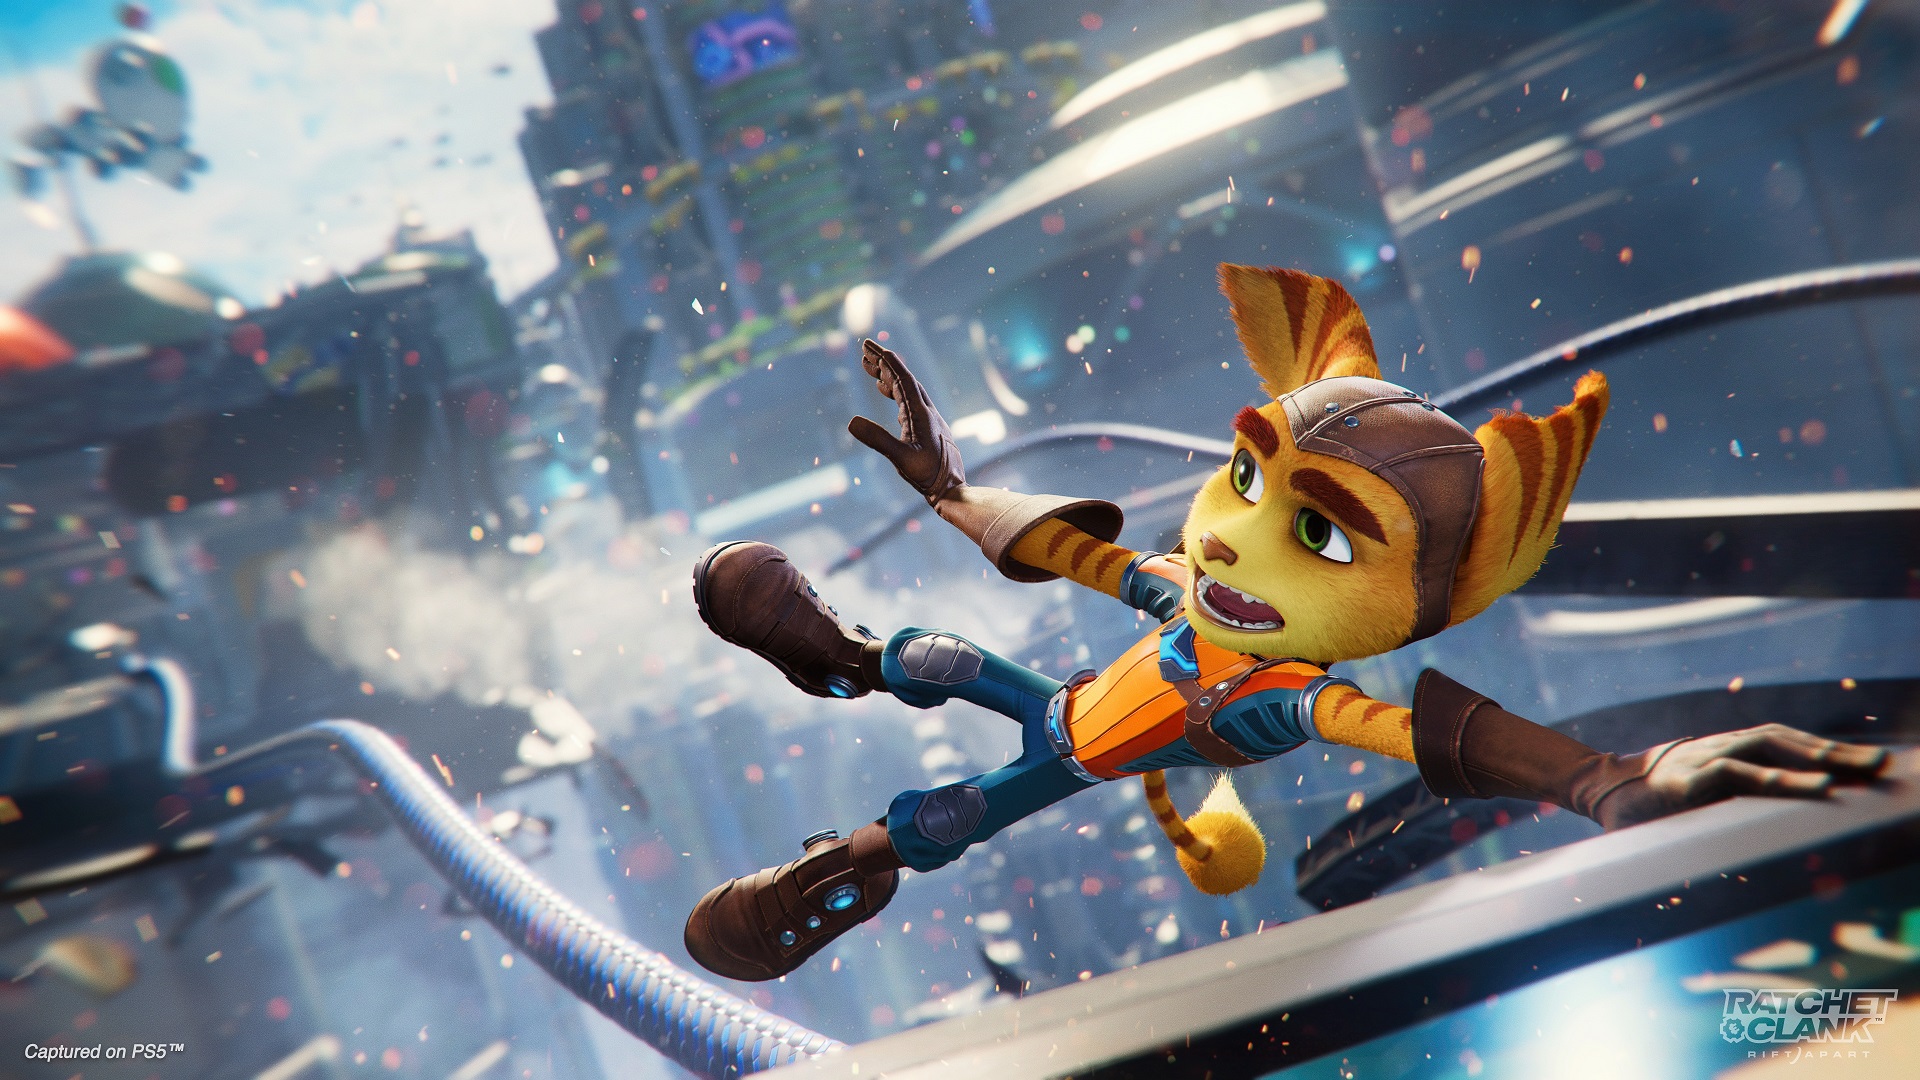 Take a look at weapons in Ratchet & Clank: Rift Apart